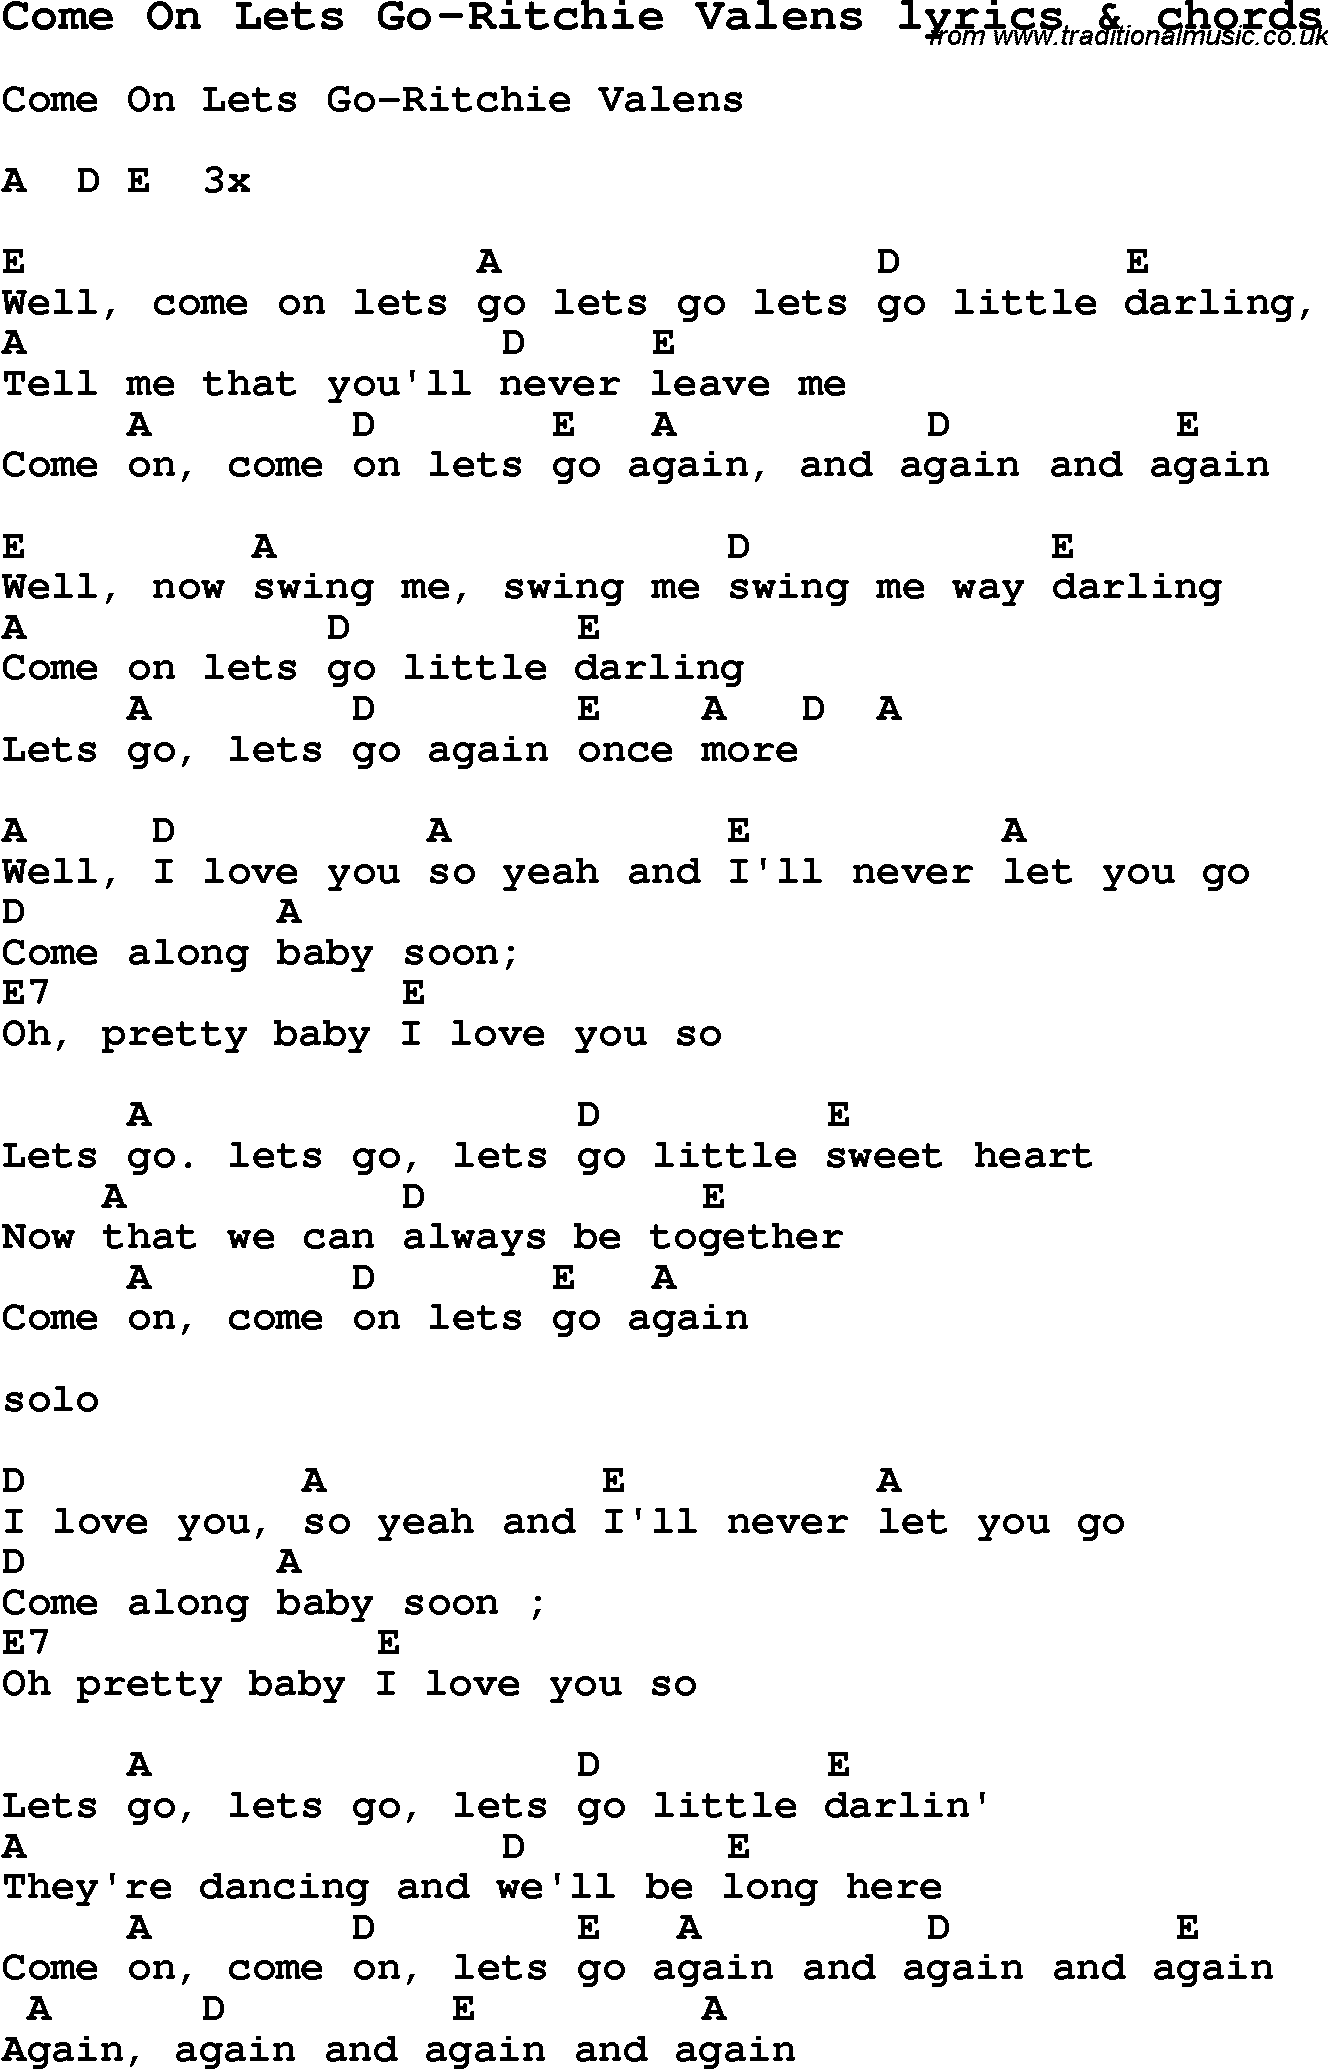 Love Song Lyrics for: Come On Lets Go-Ritchie Valens with chords for Ukulele, Guitar Banjo etc.